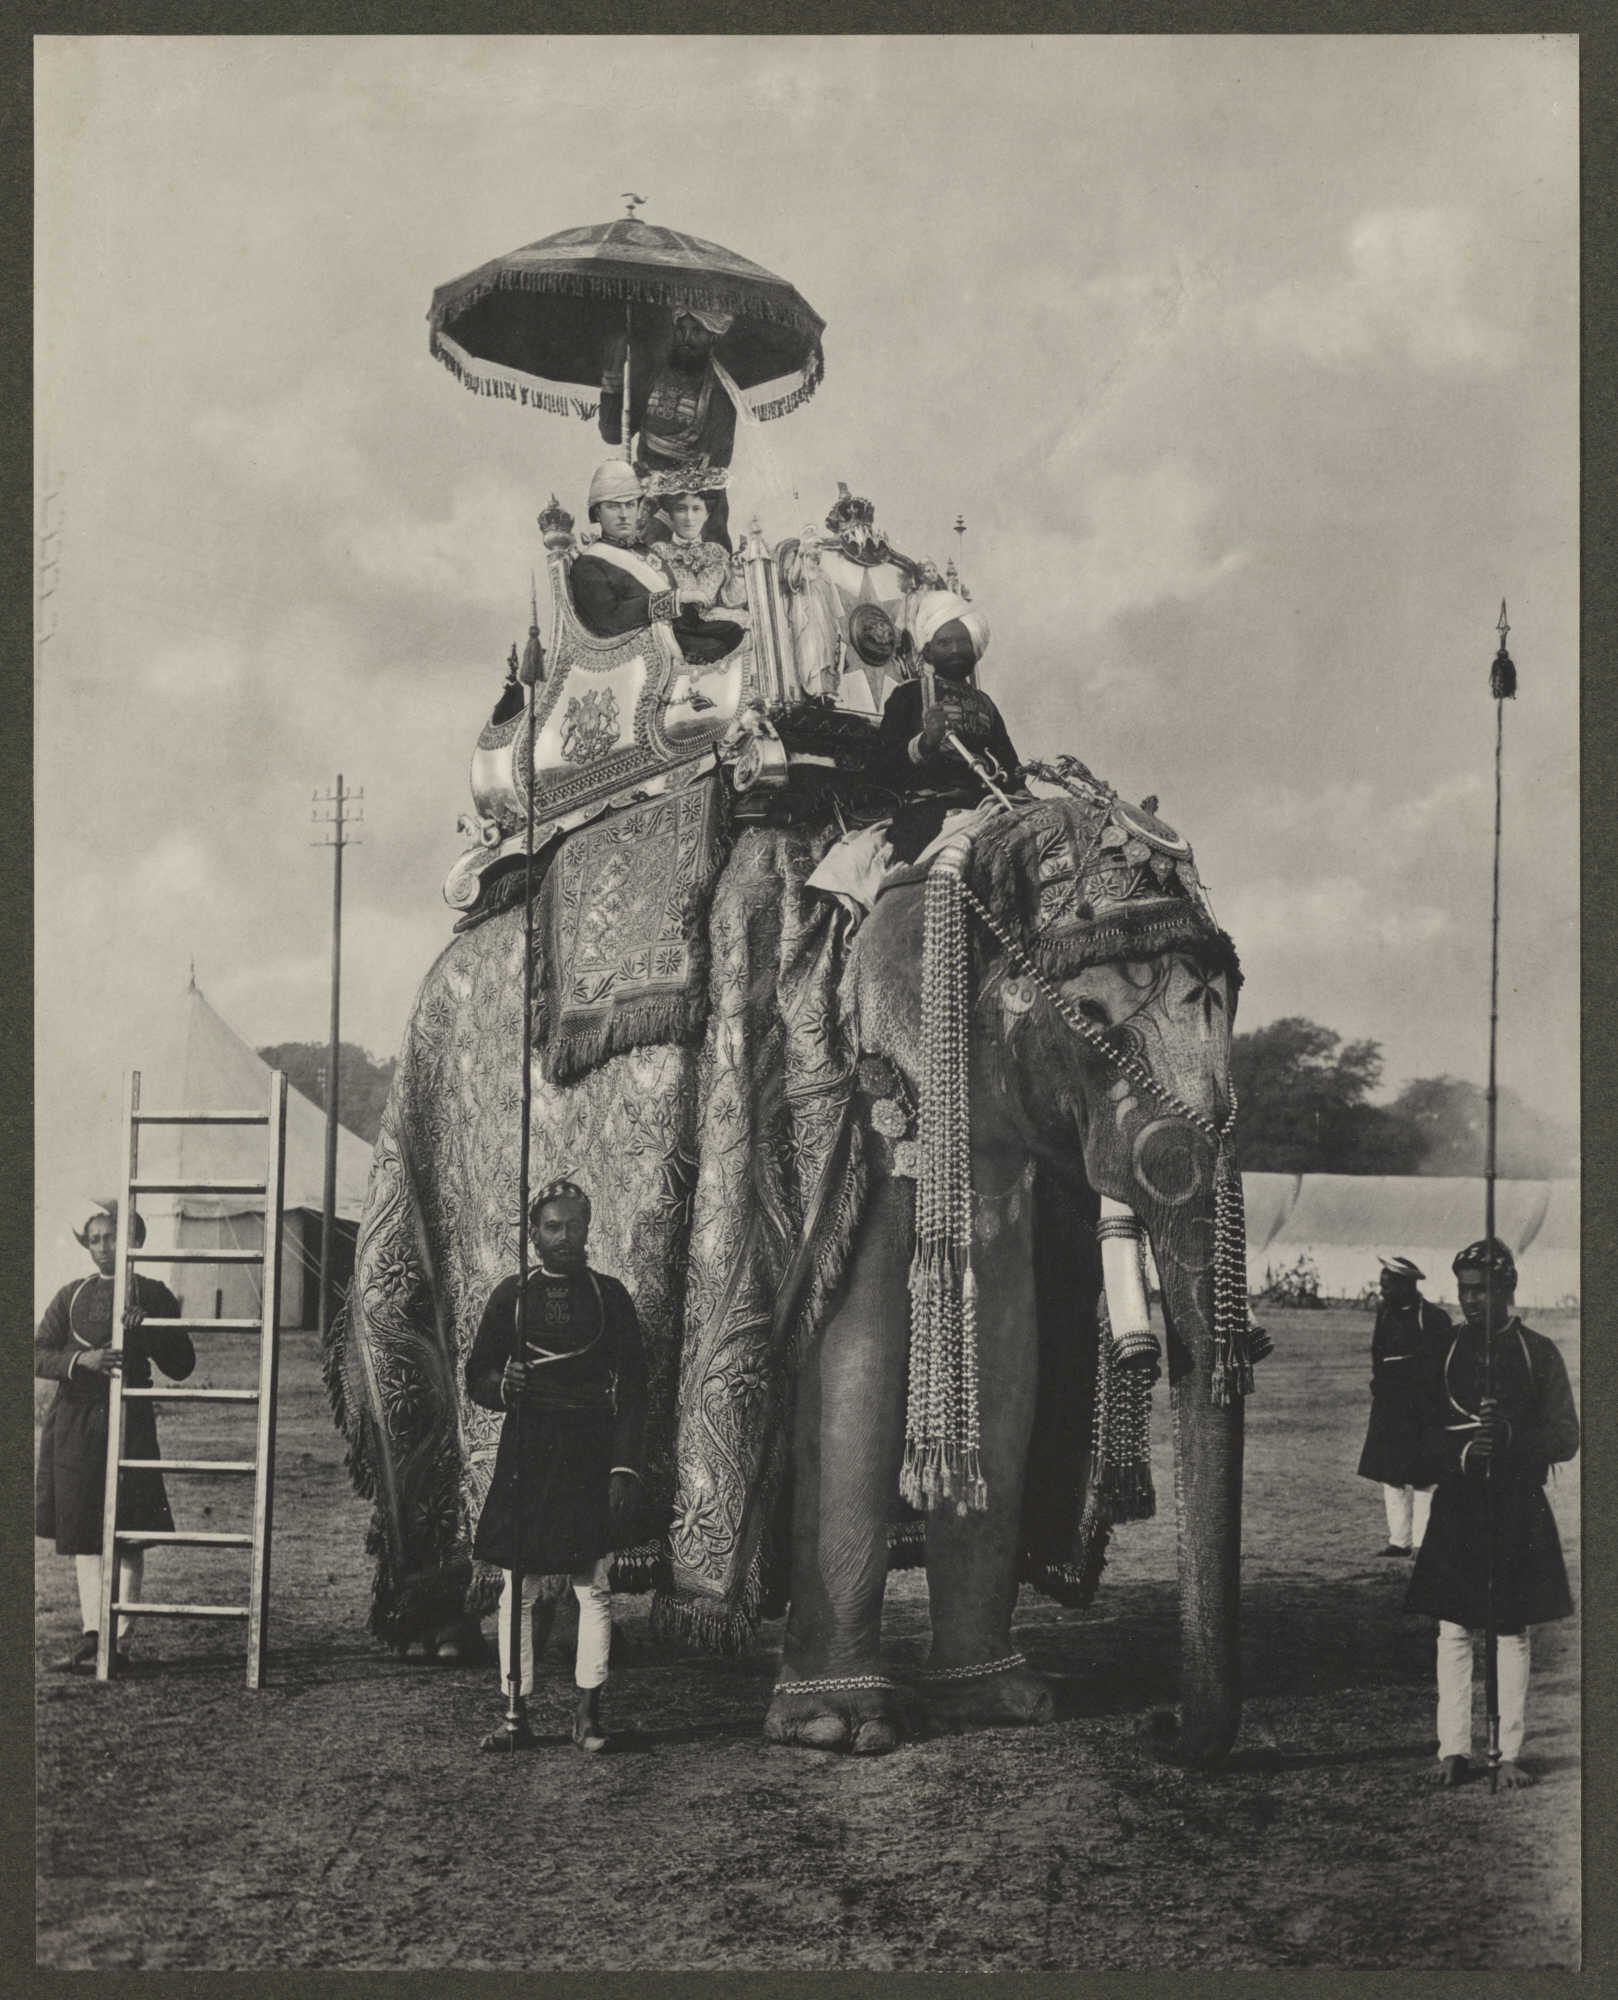 Lord and Lady Curzon ride an elephant in India, c. 1895. National Science and Media Museum. Public Domain.